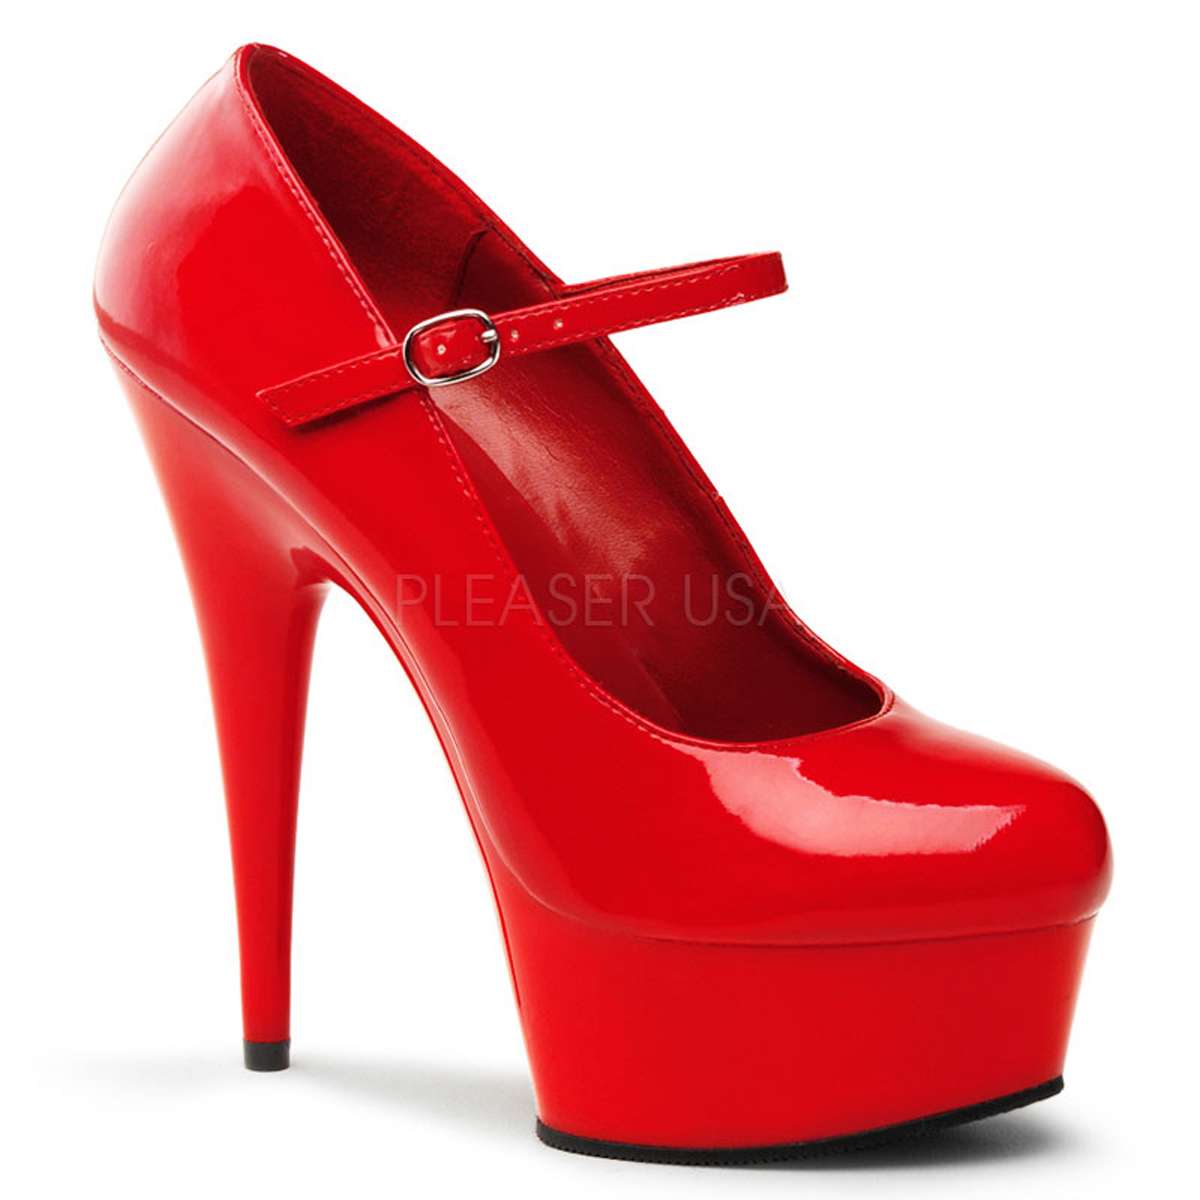 DELIGHT-687 Mary Jane High Heels Plateau Pumps rot Lack Fashion